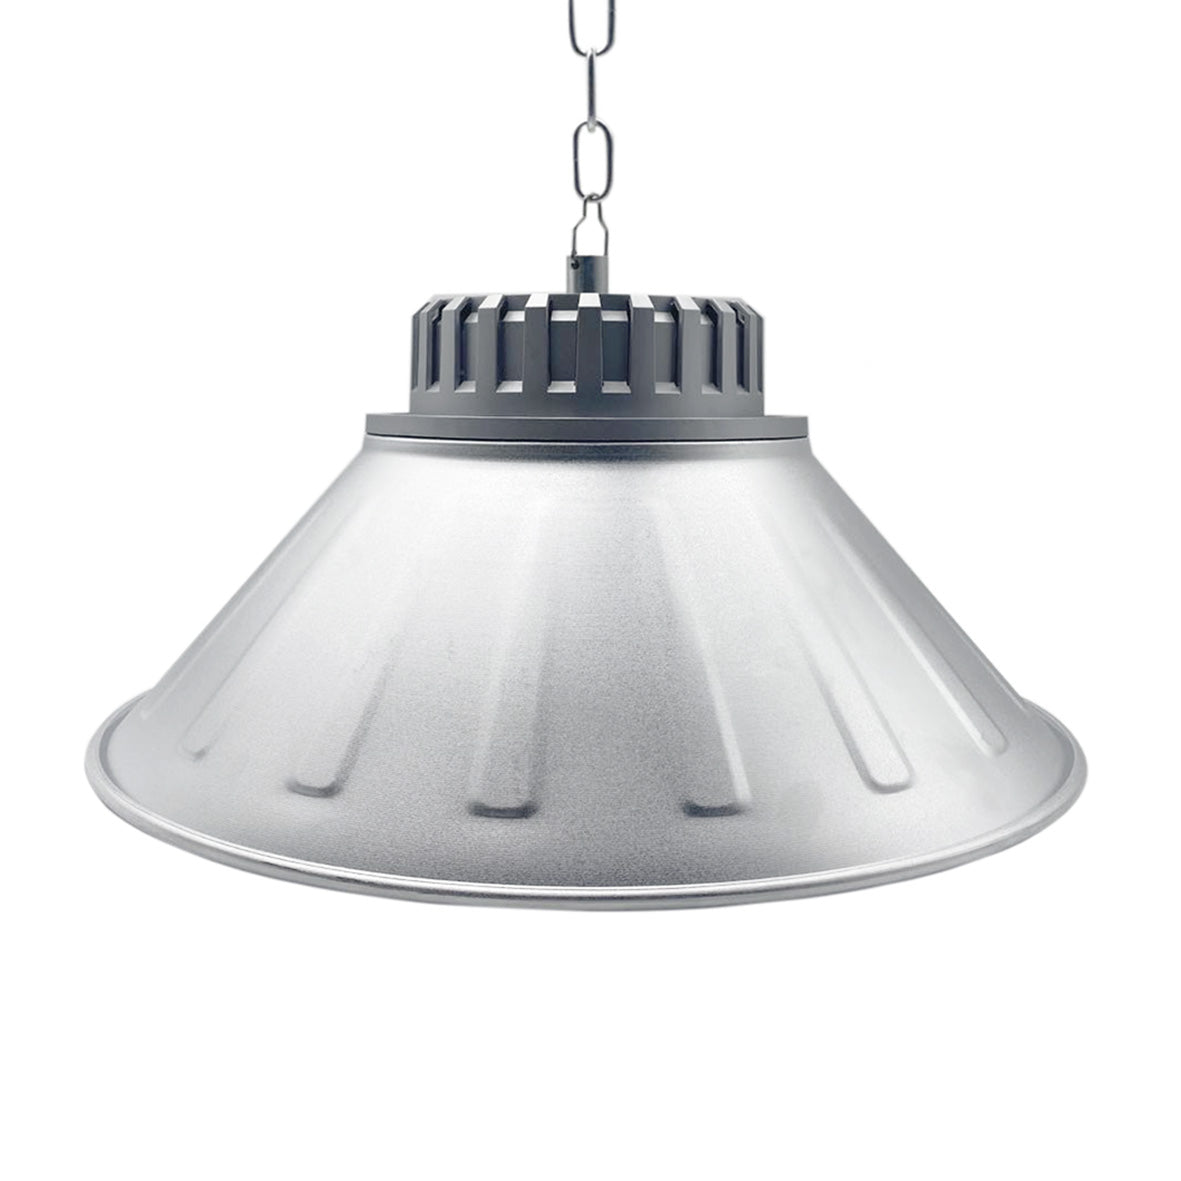 Cloche LED Industrielle 150W 120° Argent - Silamp France